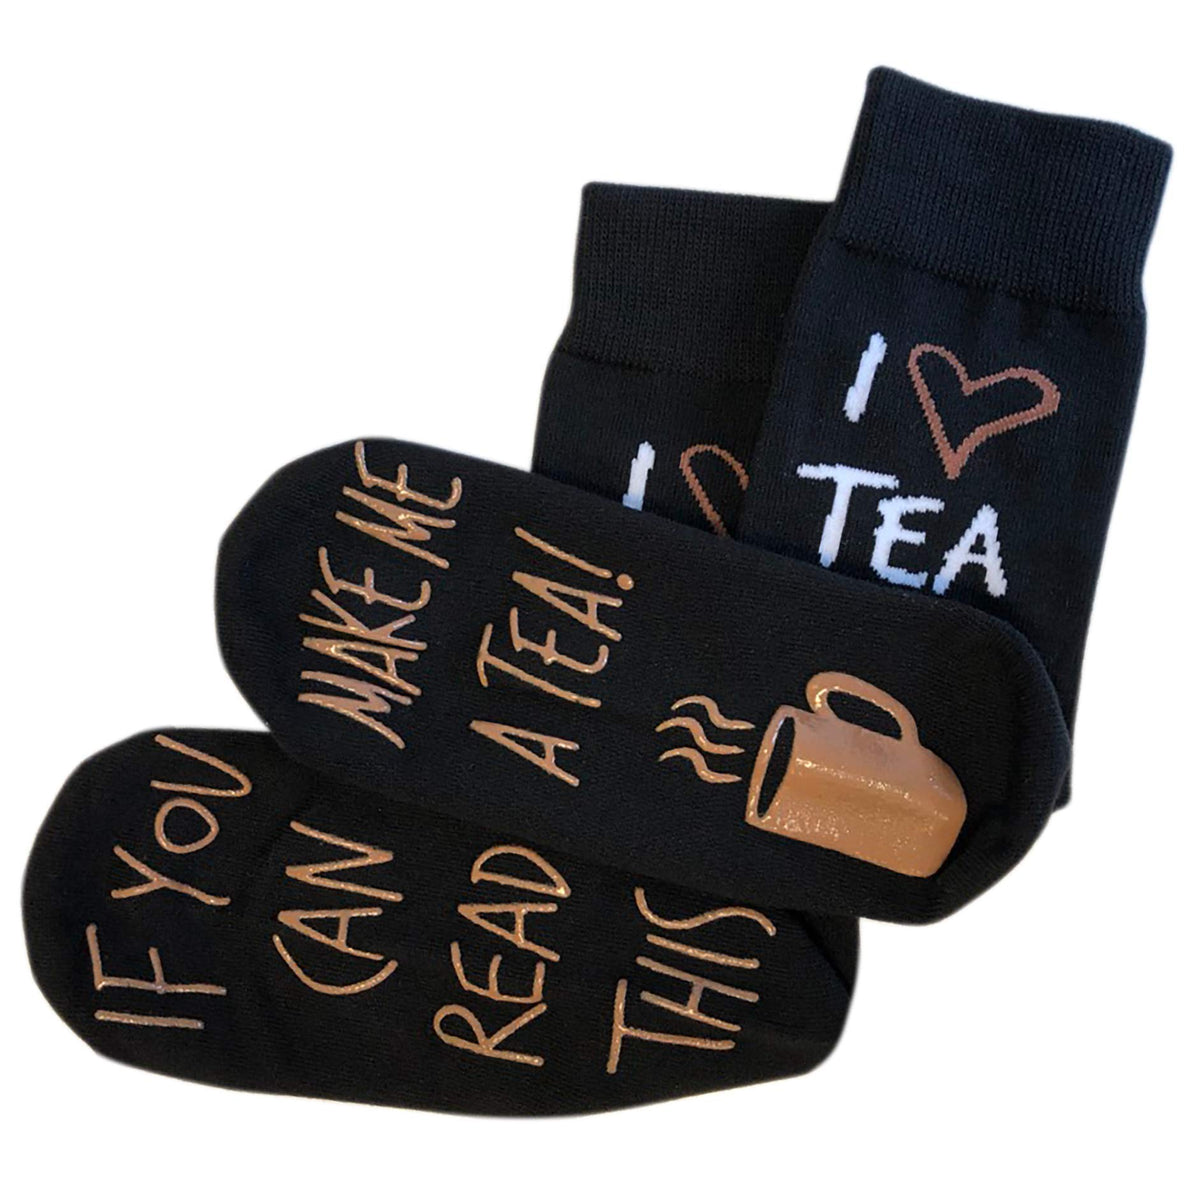 'If You Can Read This Make Me A Tea!' Funny Novelty Socks - Gift For Those People That Love Tea (Black) One Size